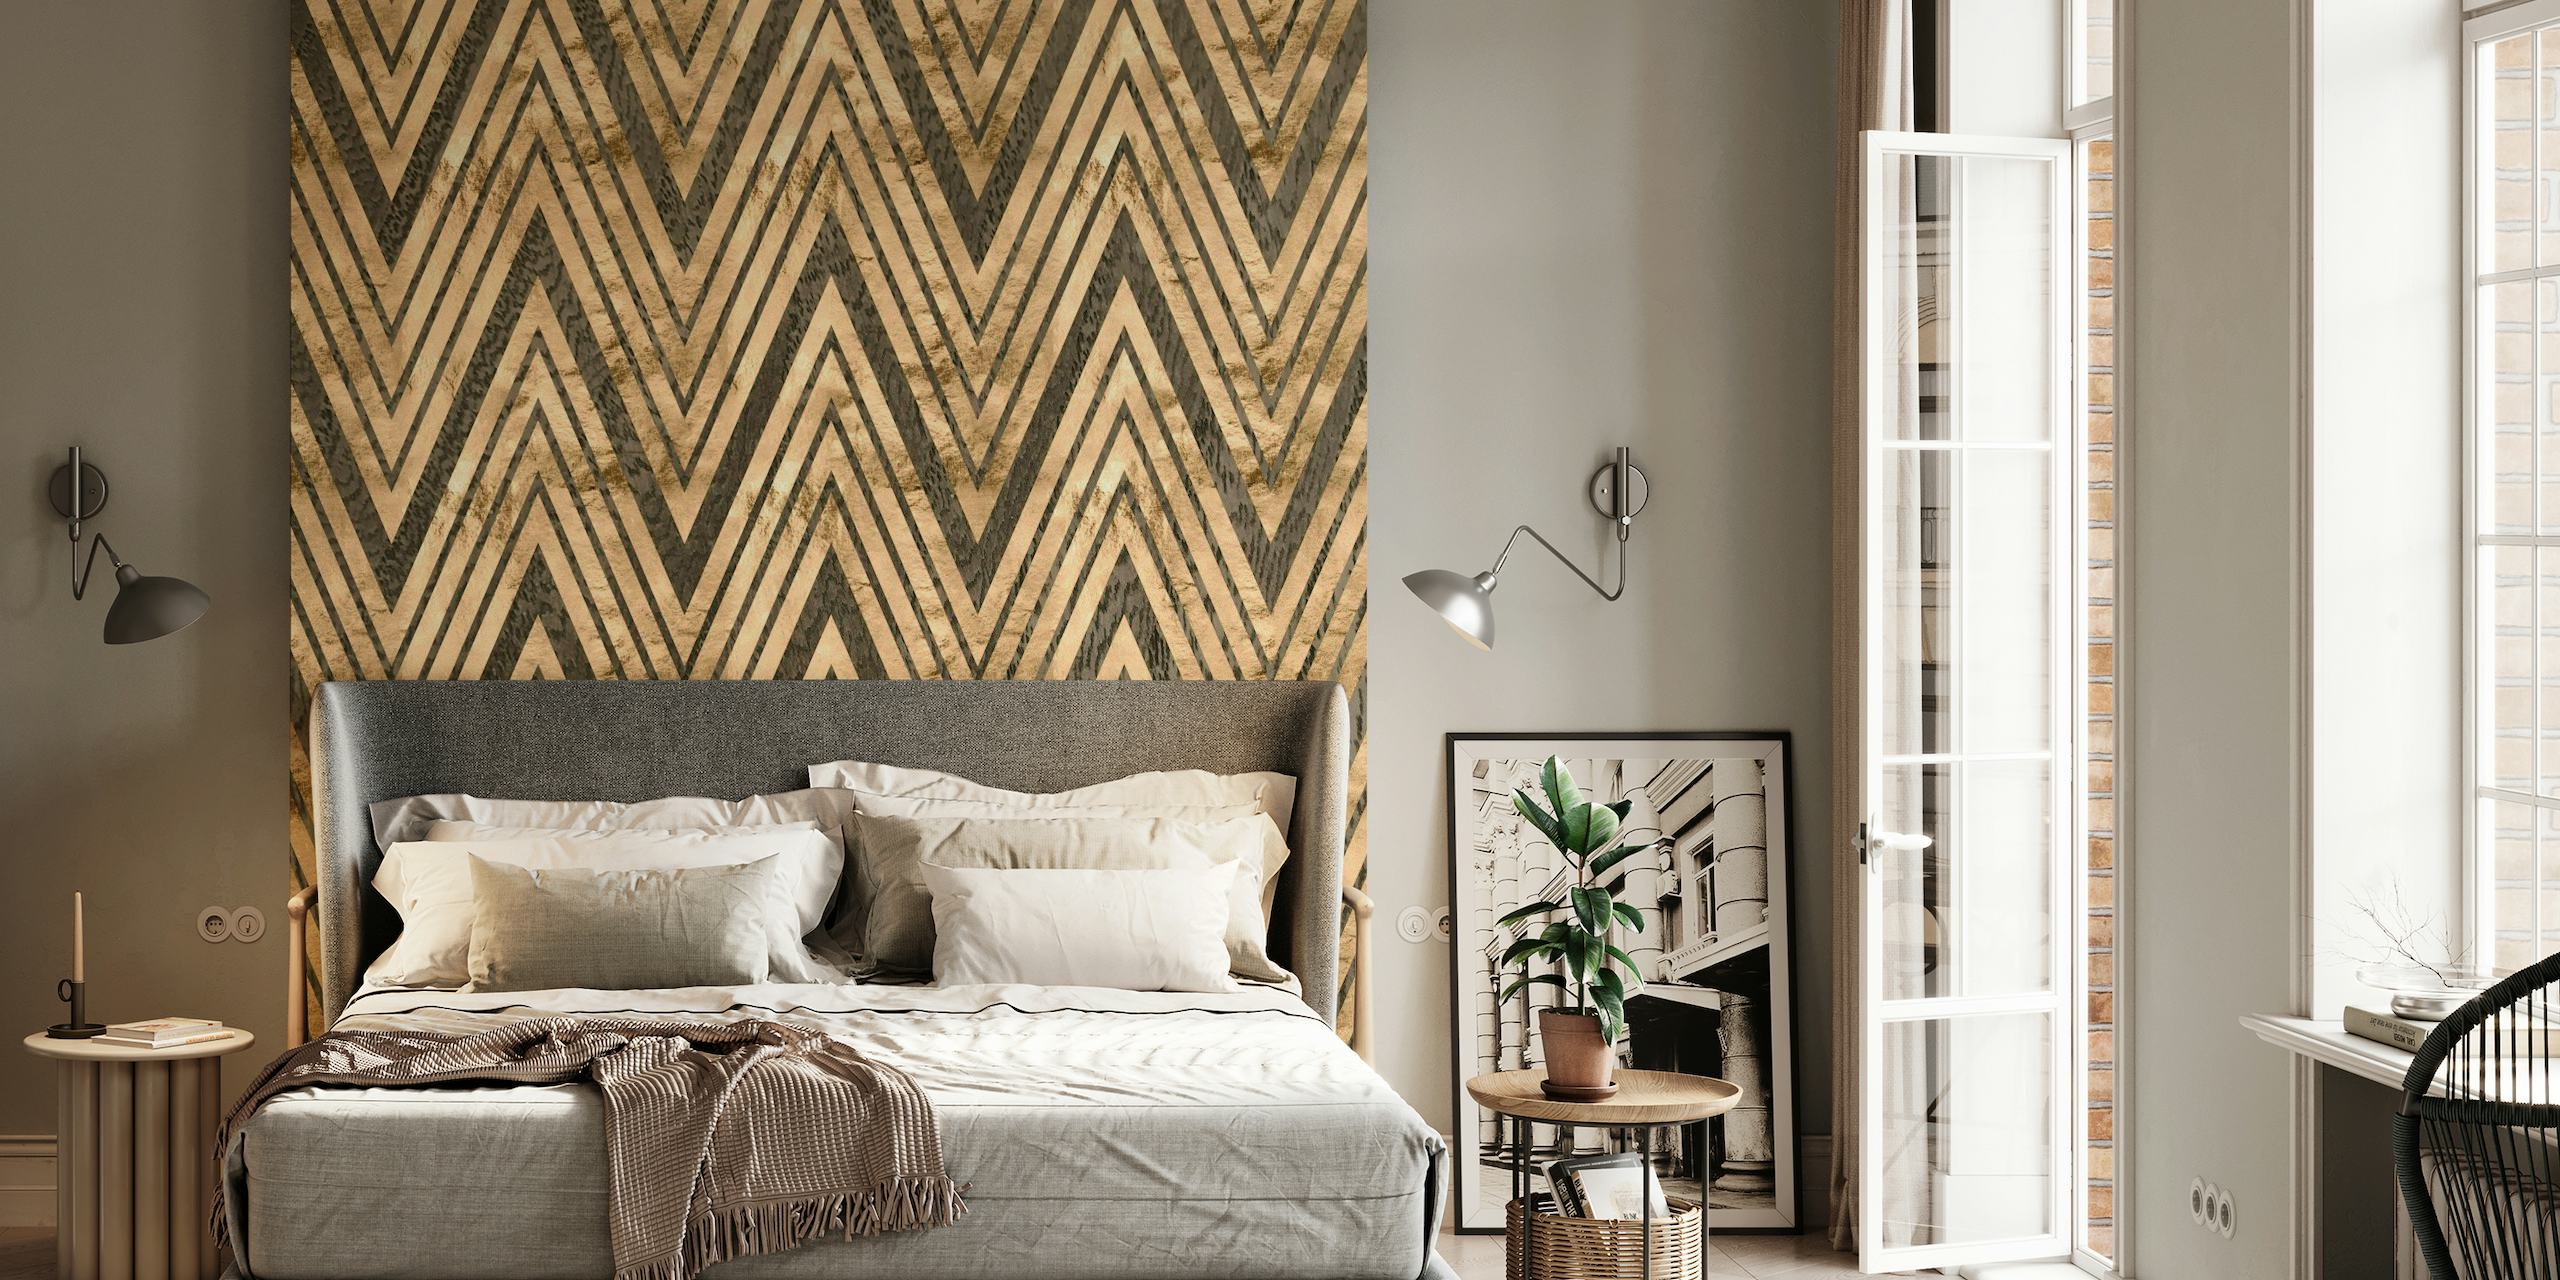 Chevron pattern wall mural in rose gold and dark wood tones for modern interior decor